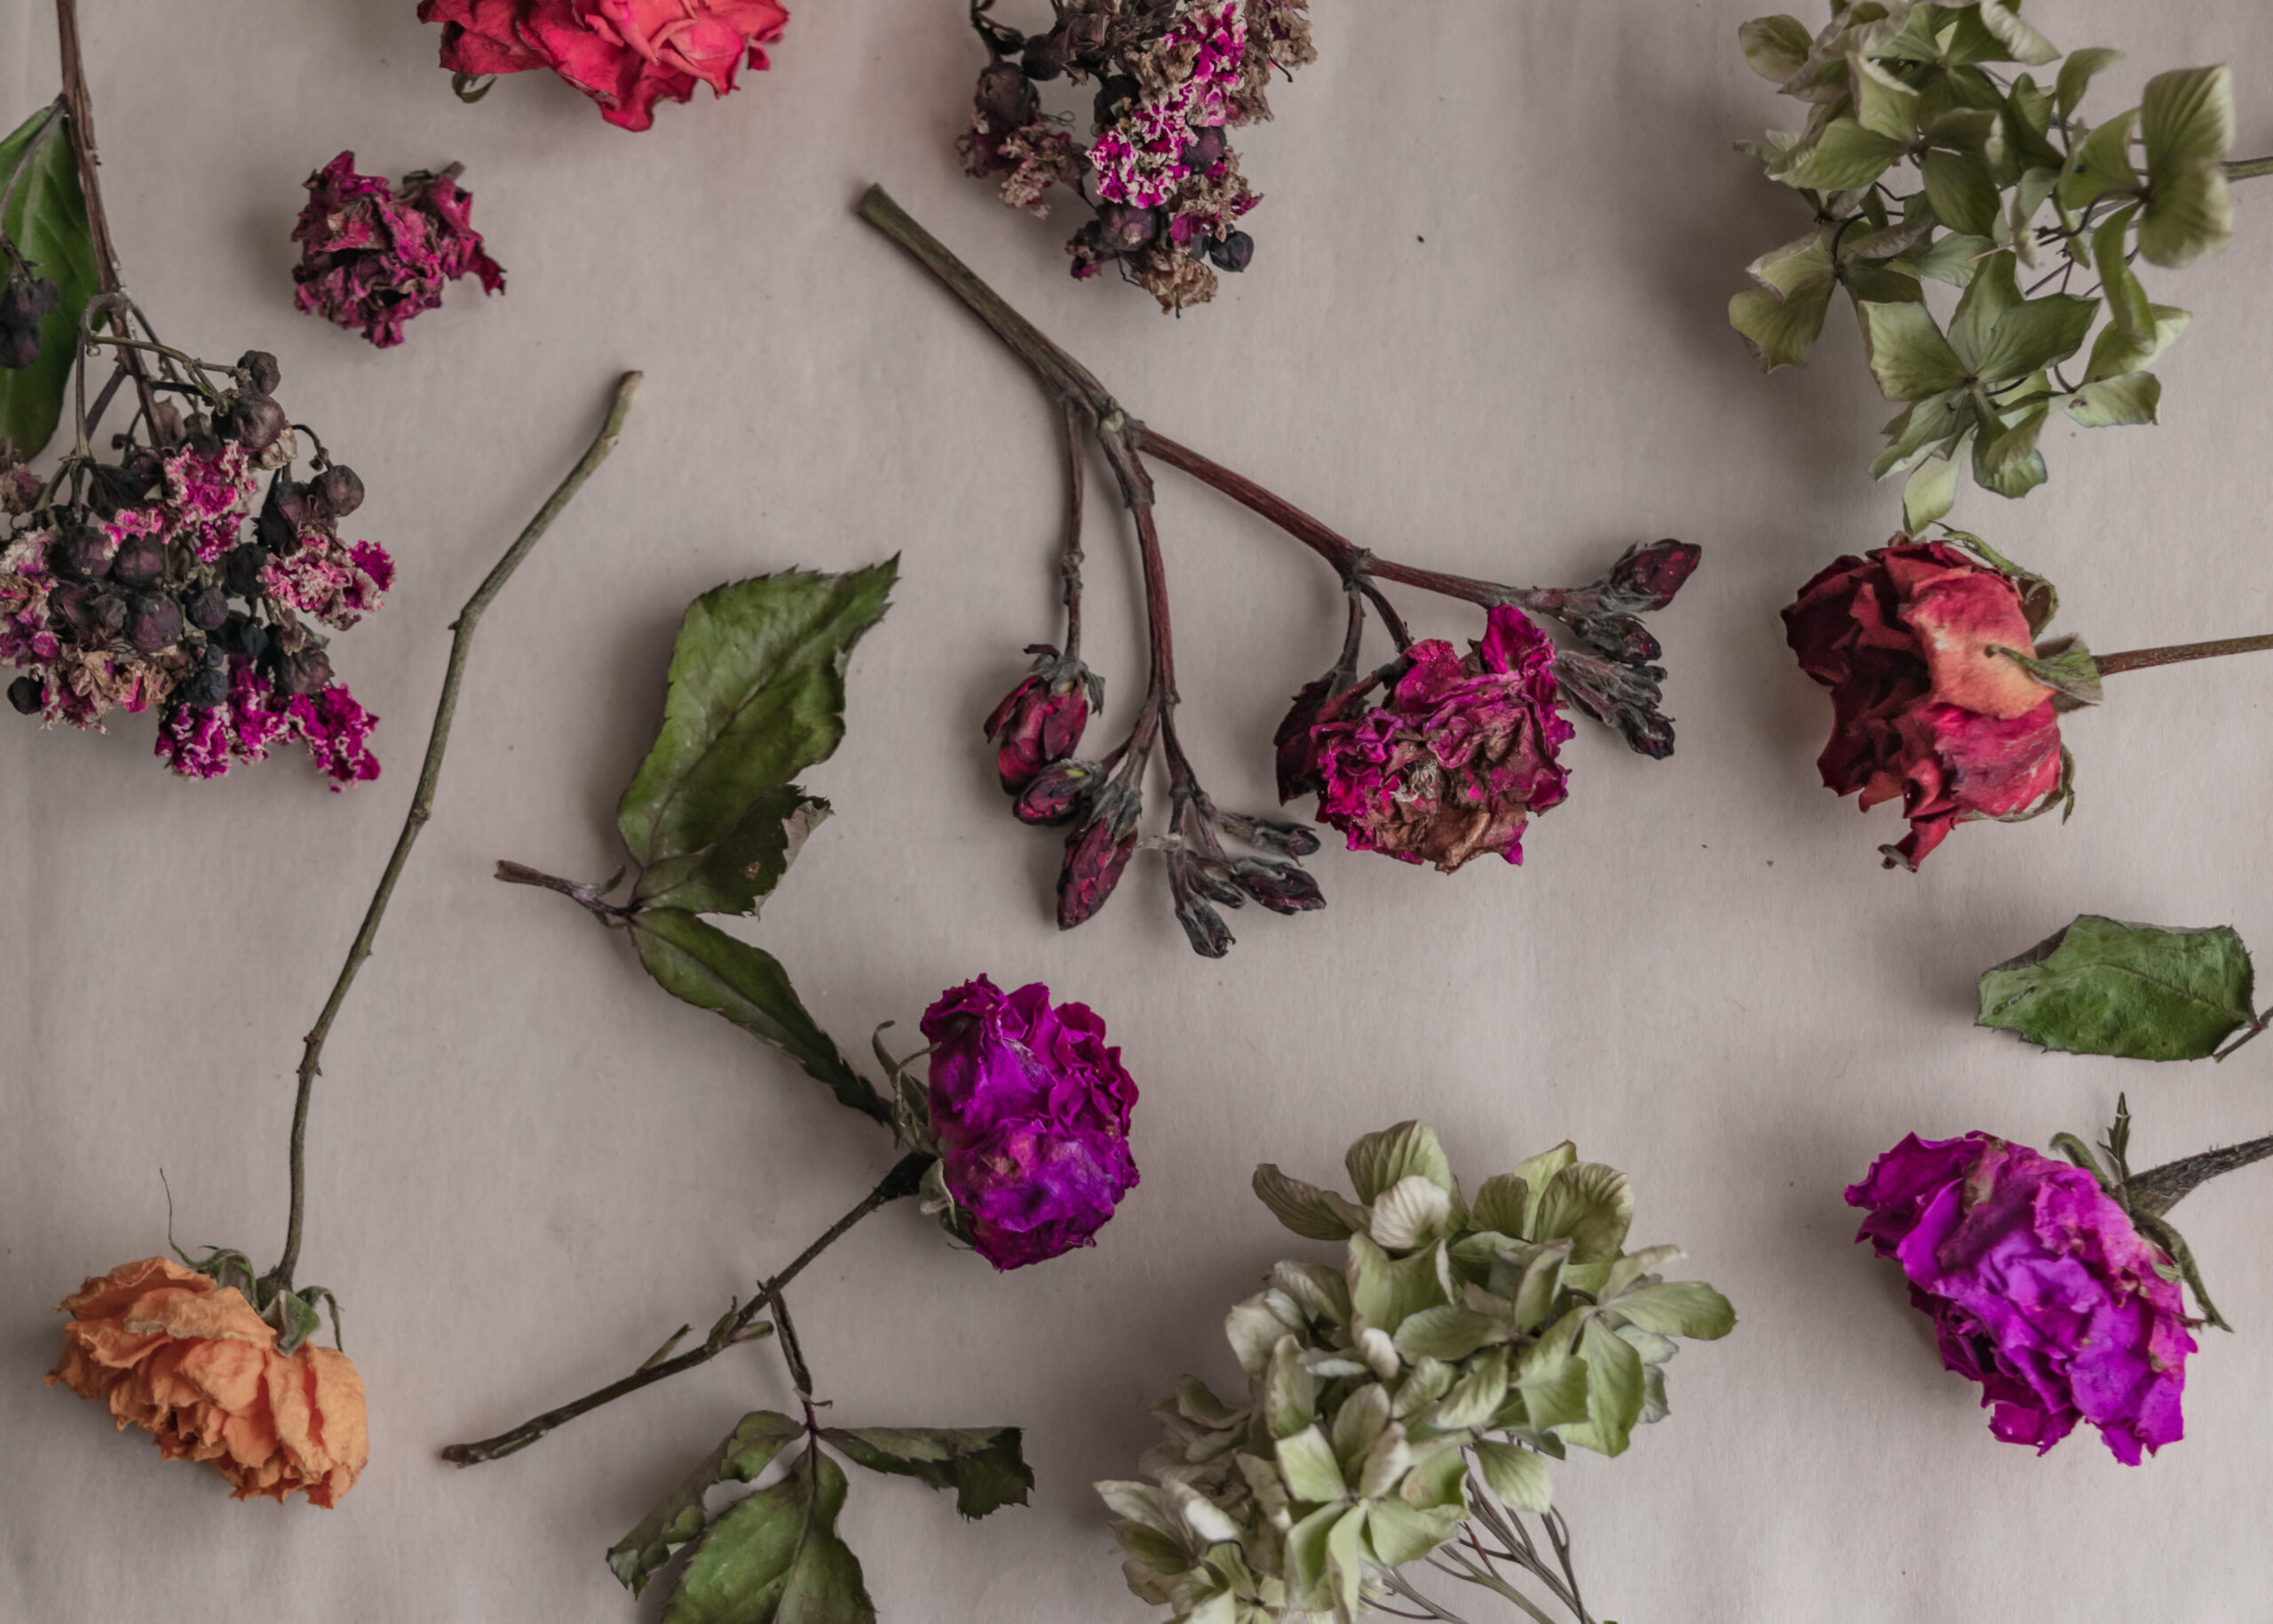 How to Preserve Roses: Keep Roses Fresh Forever